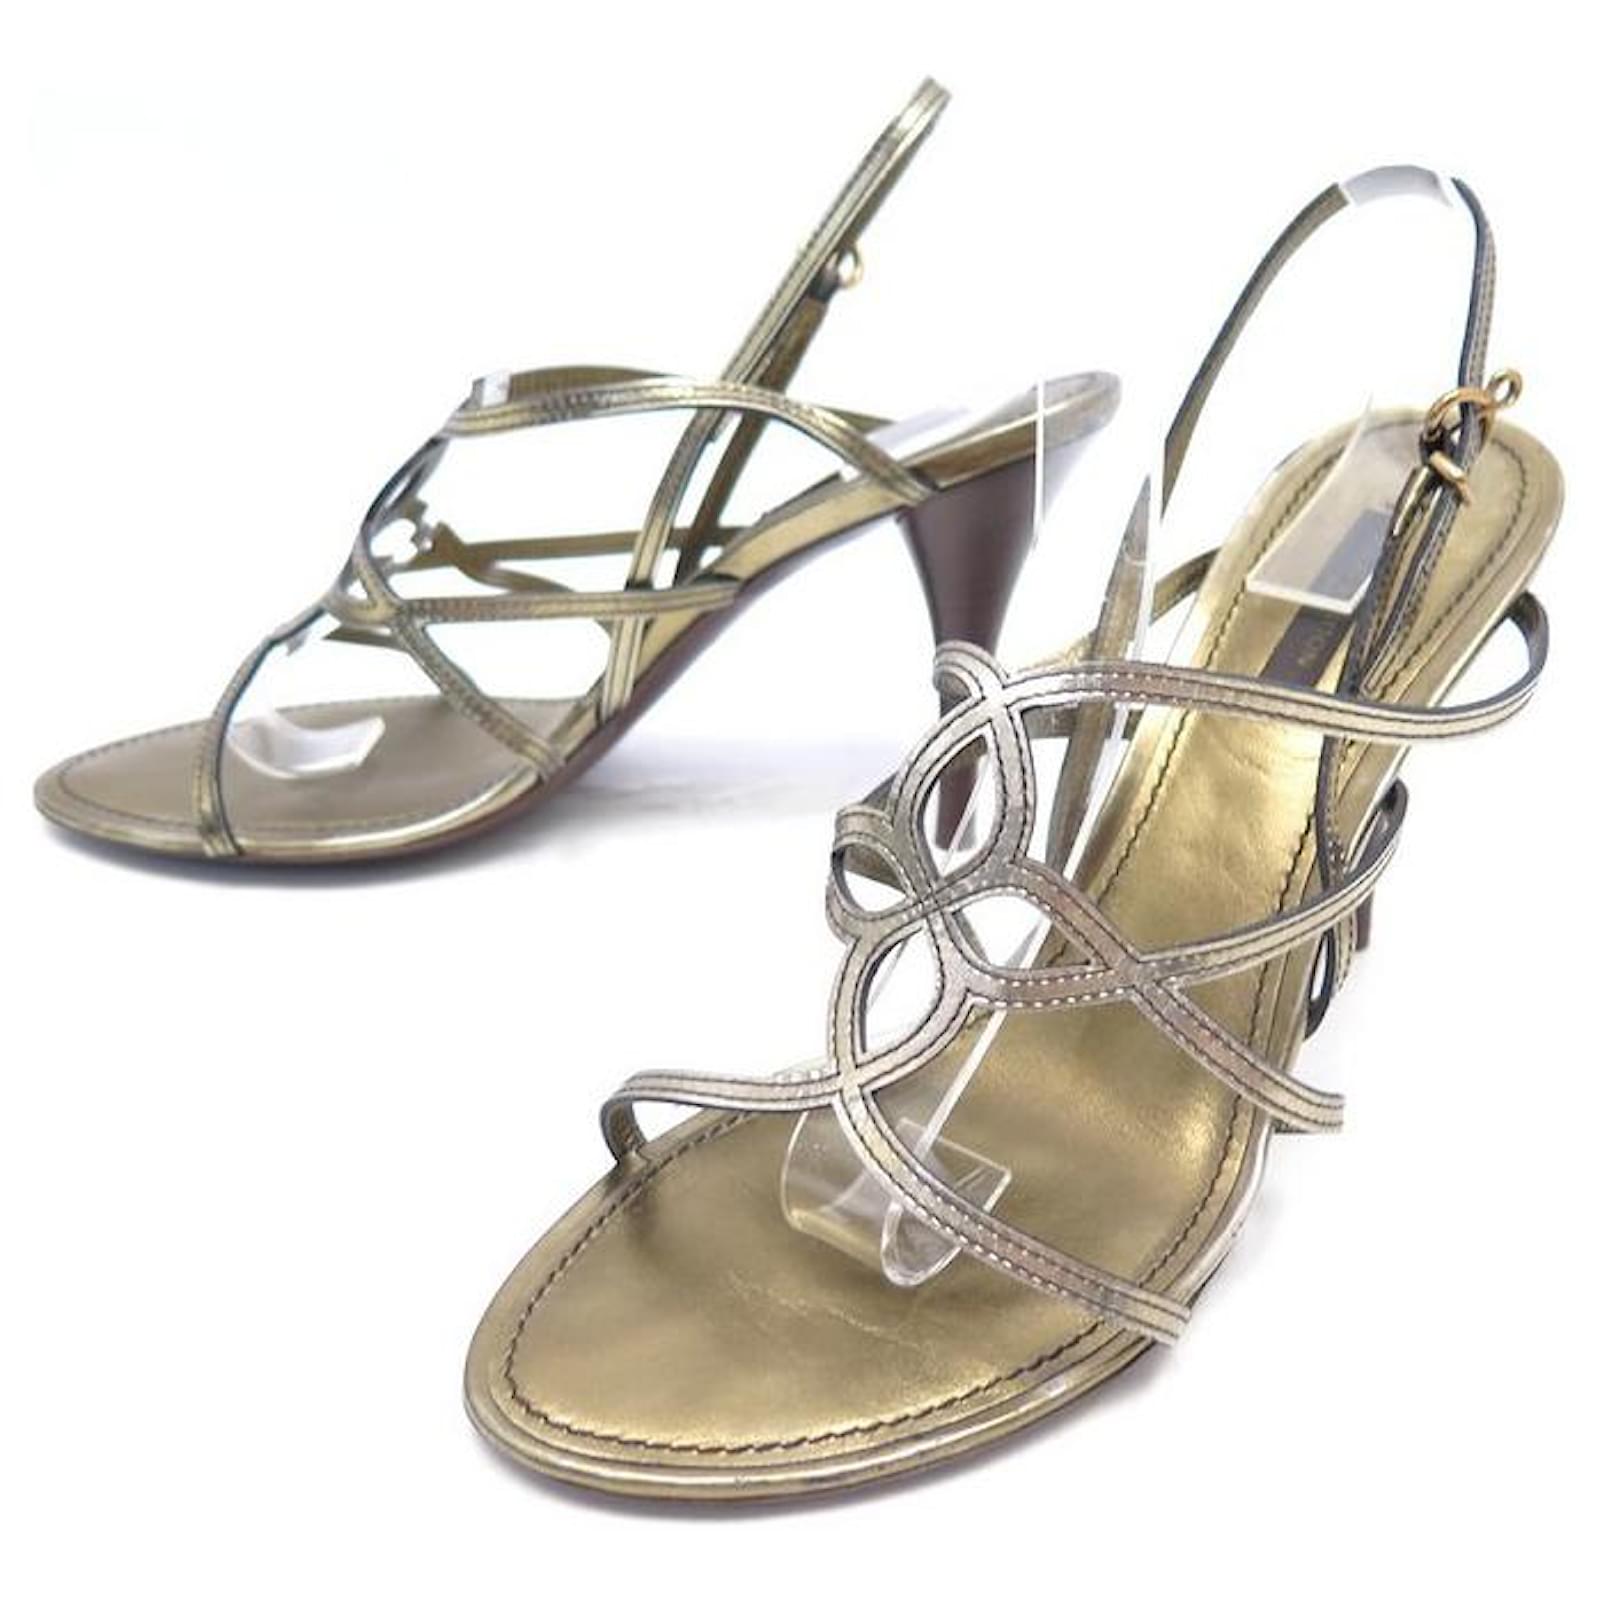 LOUIS VUITTON SHOES SANDALS WITH HEELS 40 LEATHER GOLD SHOES GOLD